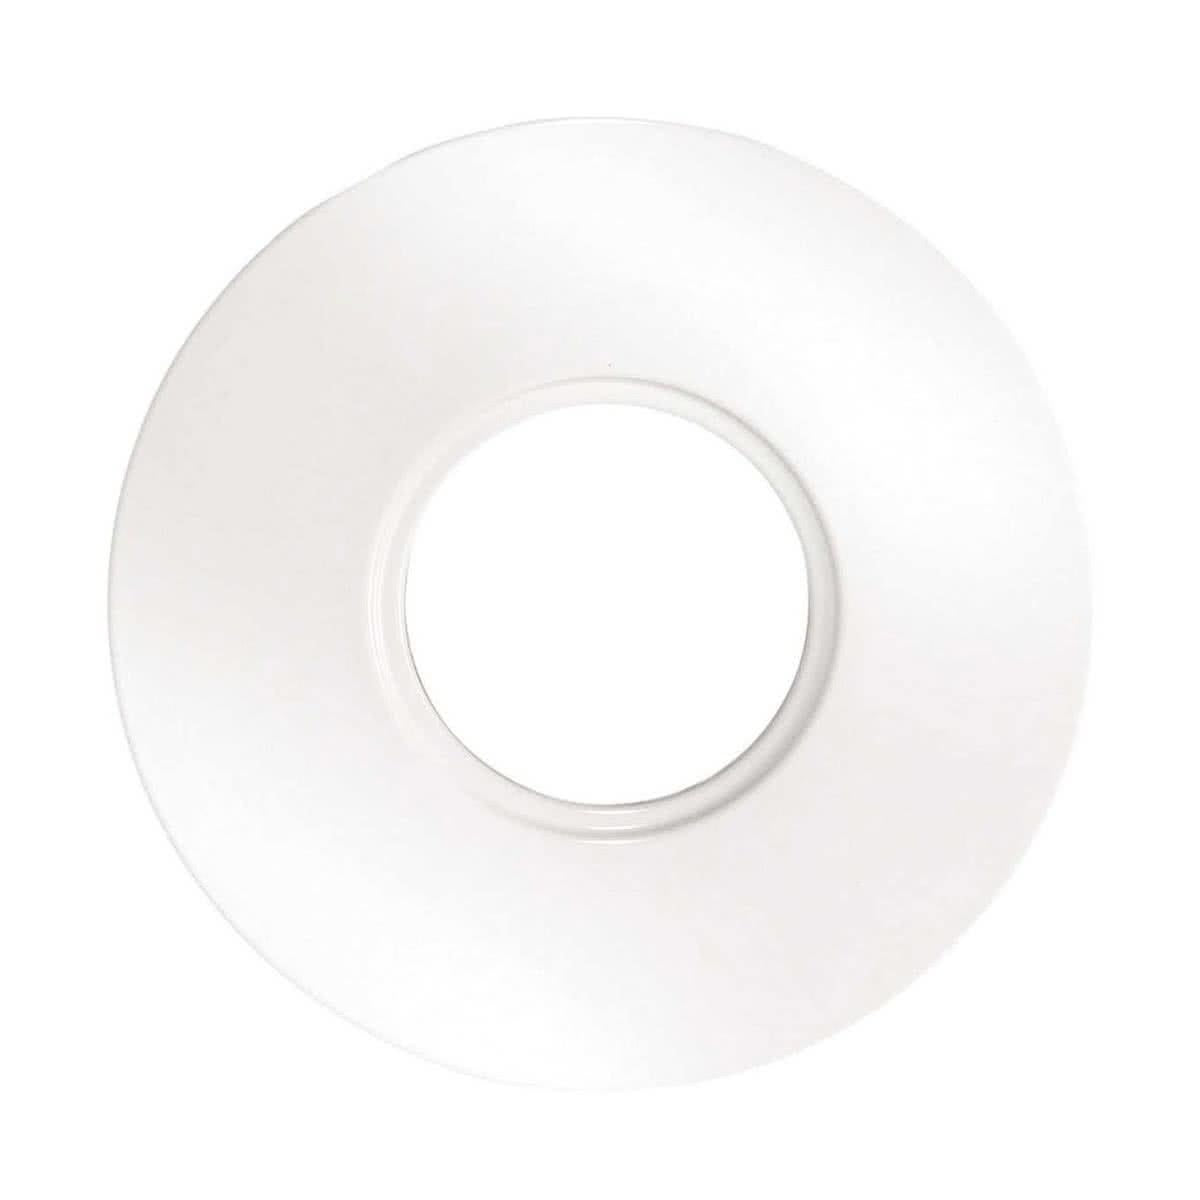 160mm Fixed Downlight Extension / Adapter Plate